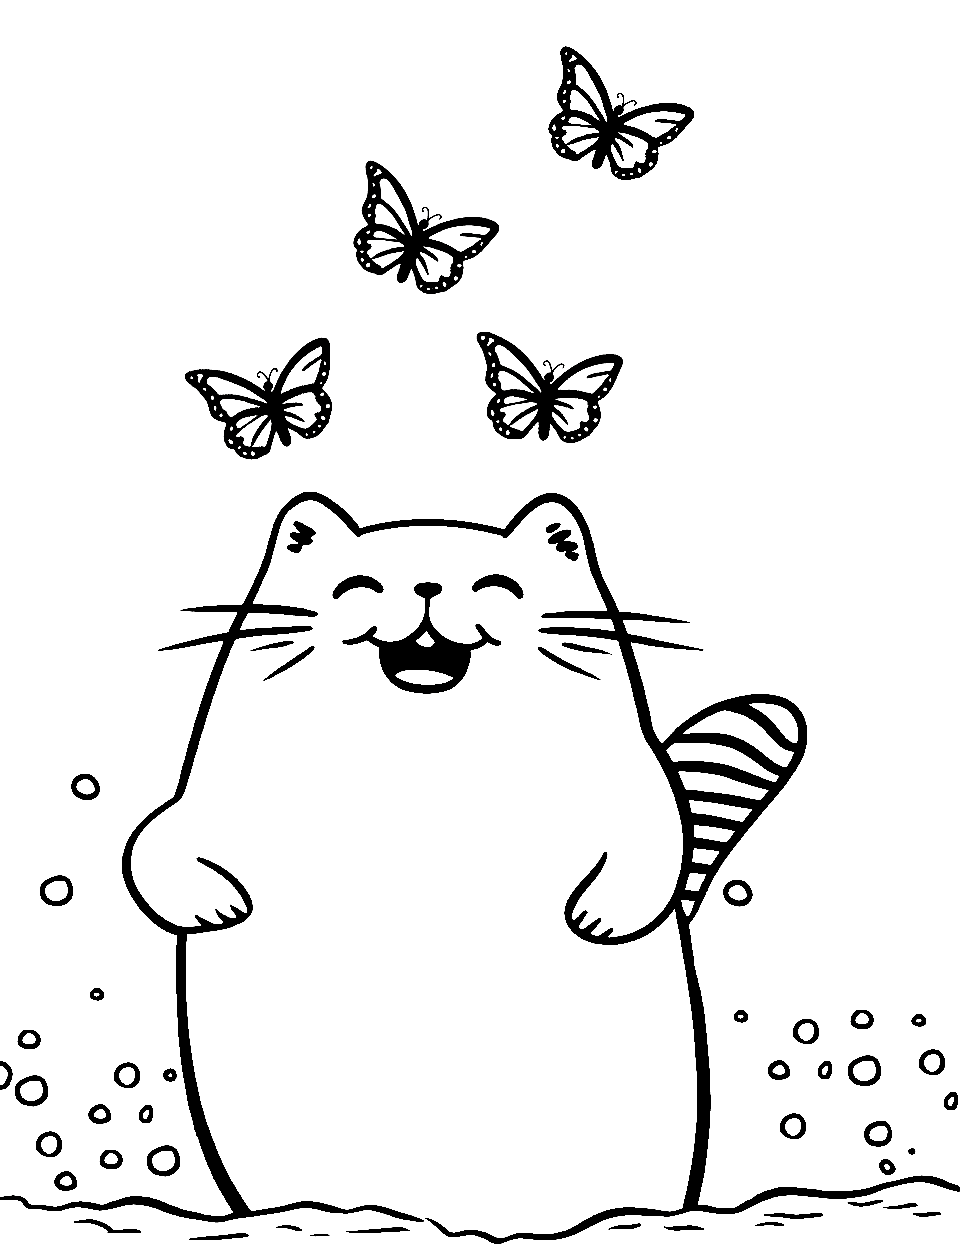 Happy and Fun Coloring Page - Pusheen chasing after butterflies with glee.